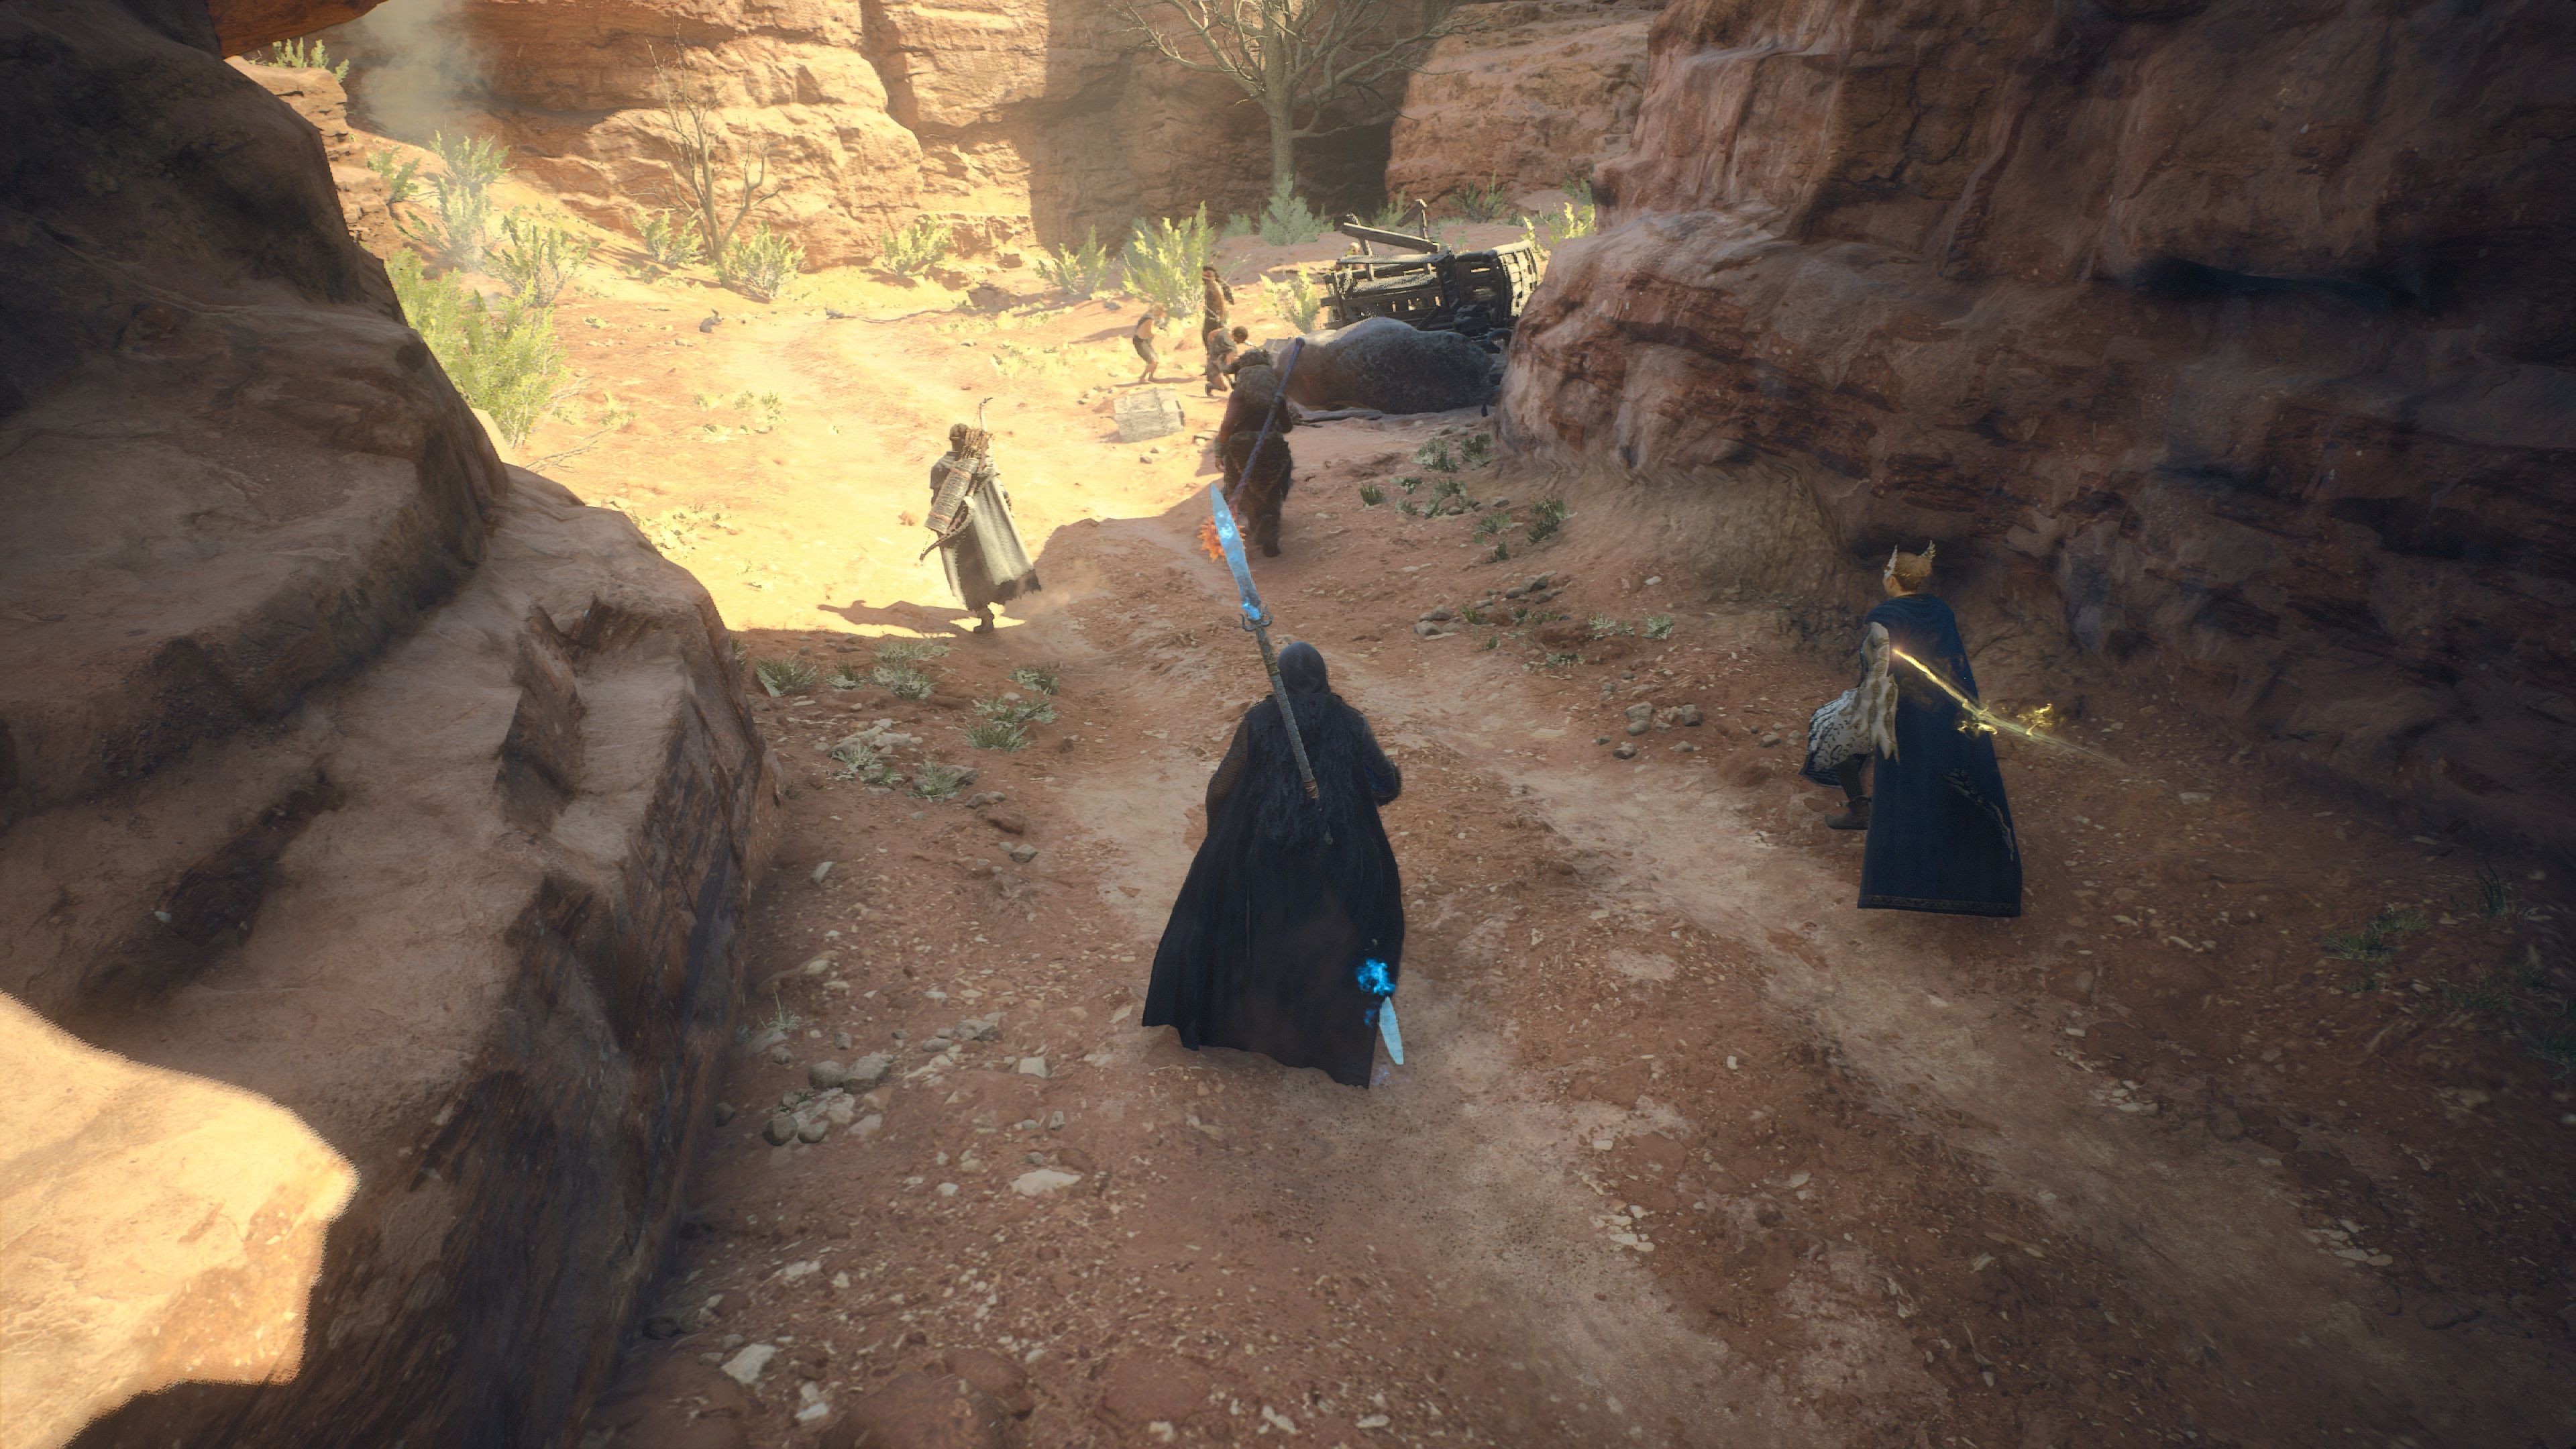 The Oxcart Raid during Mercy among Thieves in Dragon's Dogma 2.